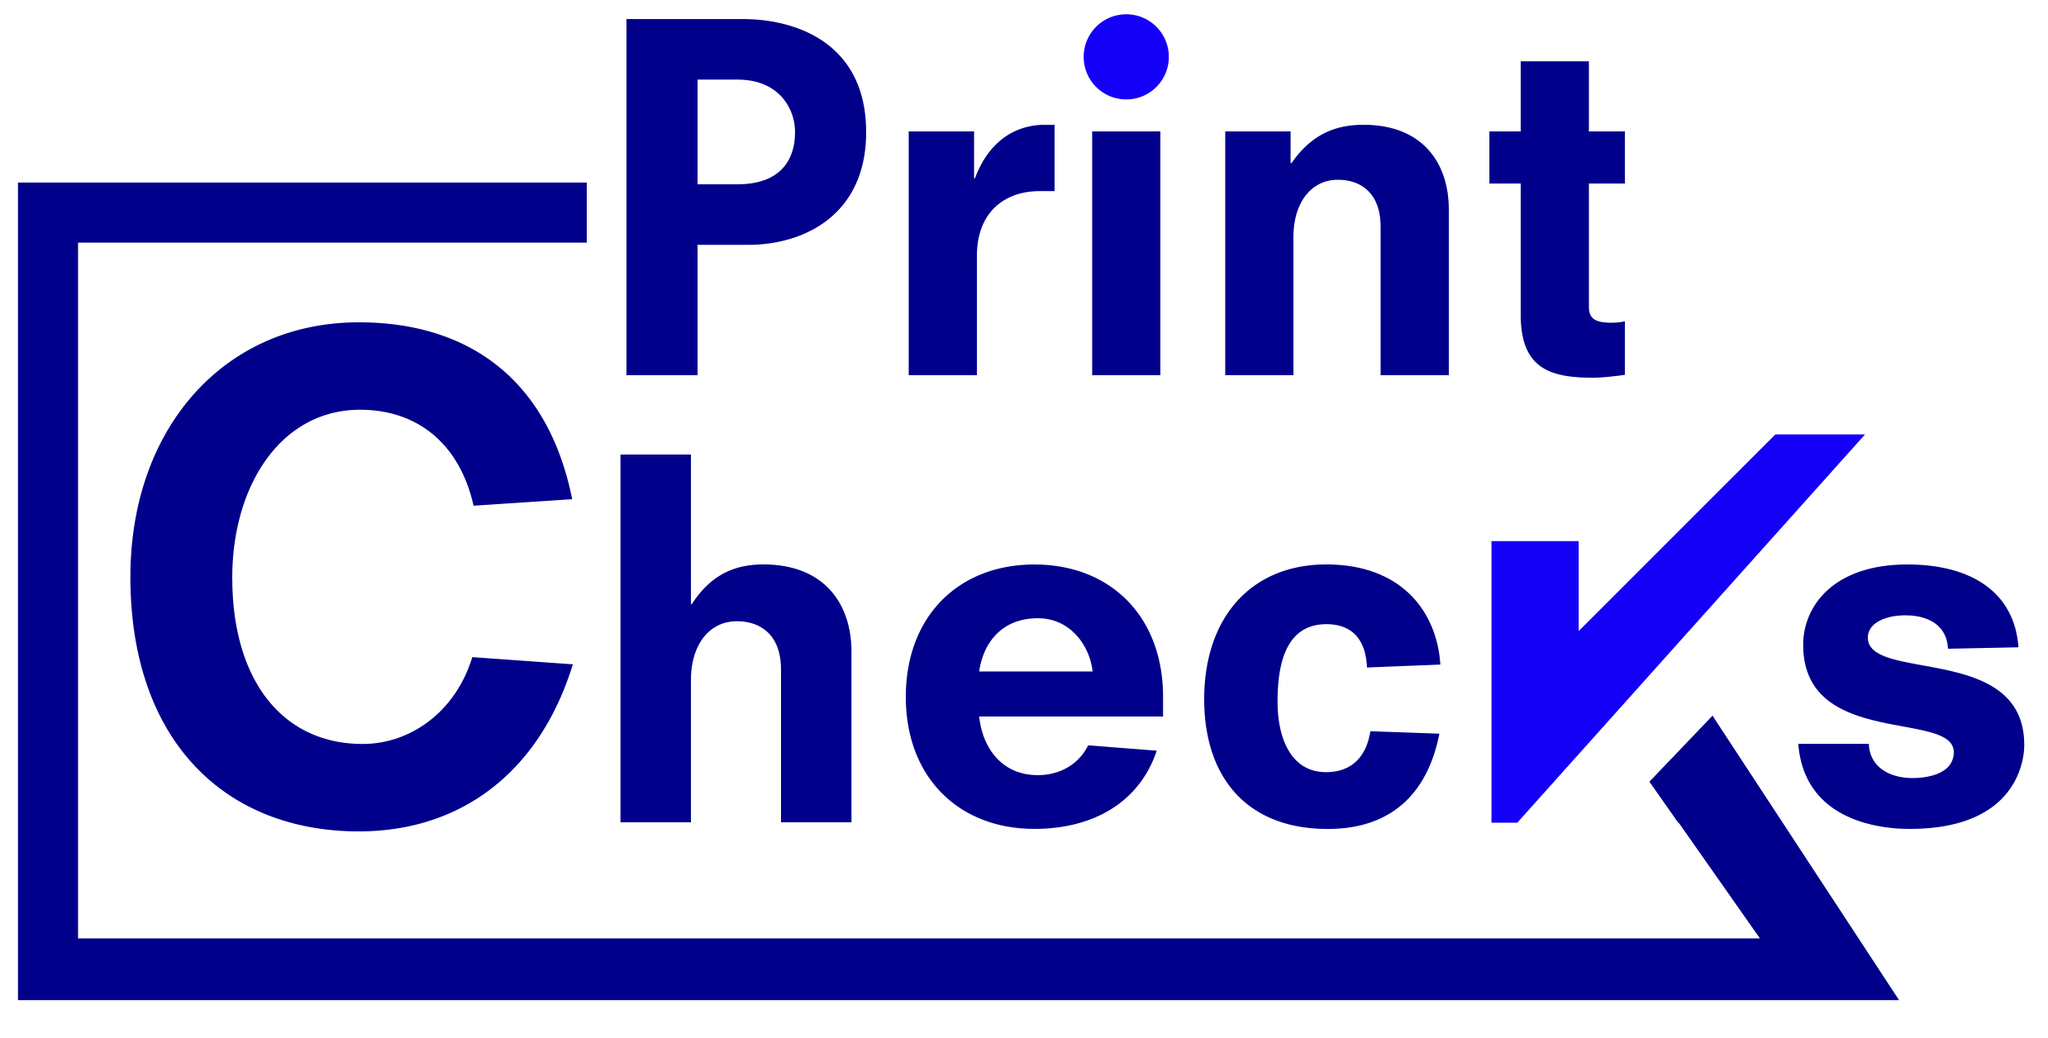 print-check-online-the-finest-check-printing-software-enab-flickr